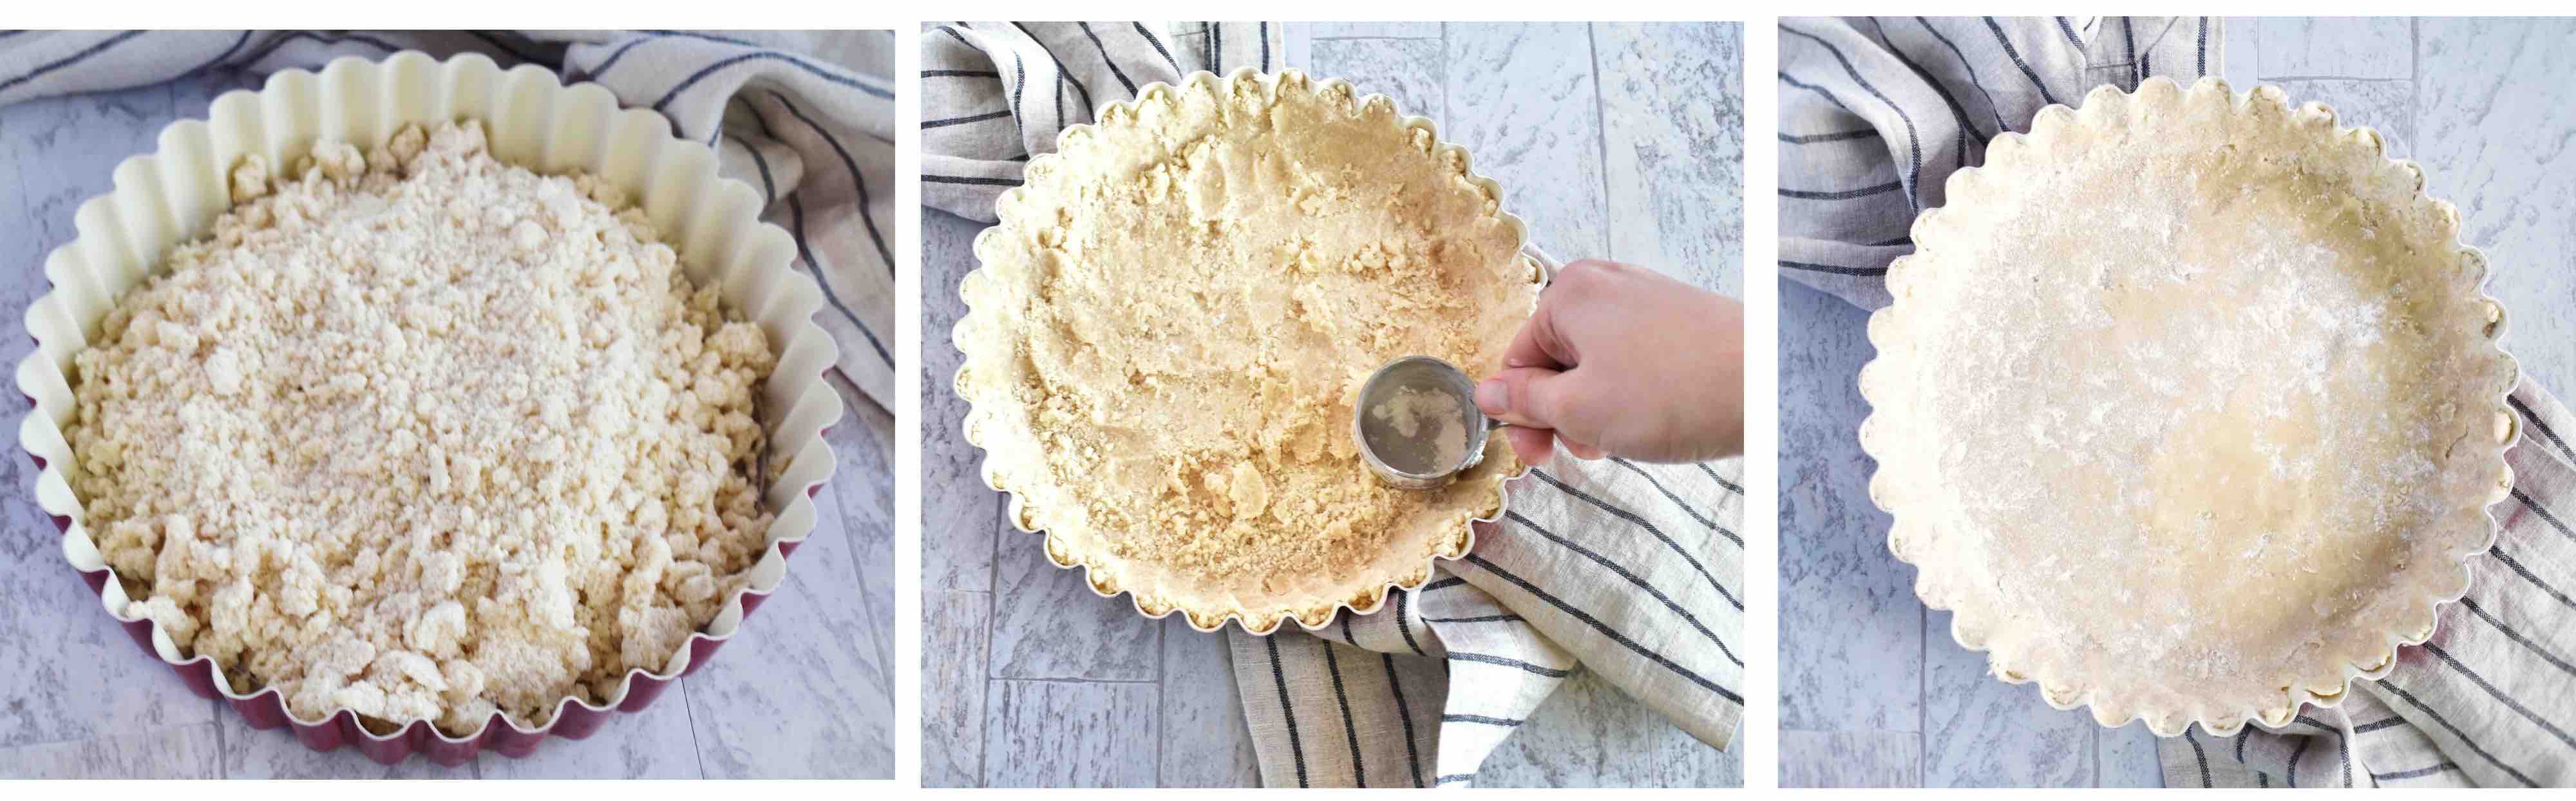 3 images showing how to press shortbread crust into pan